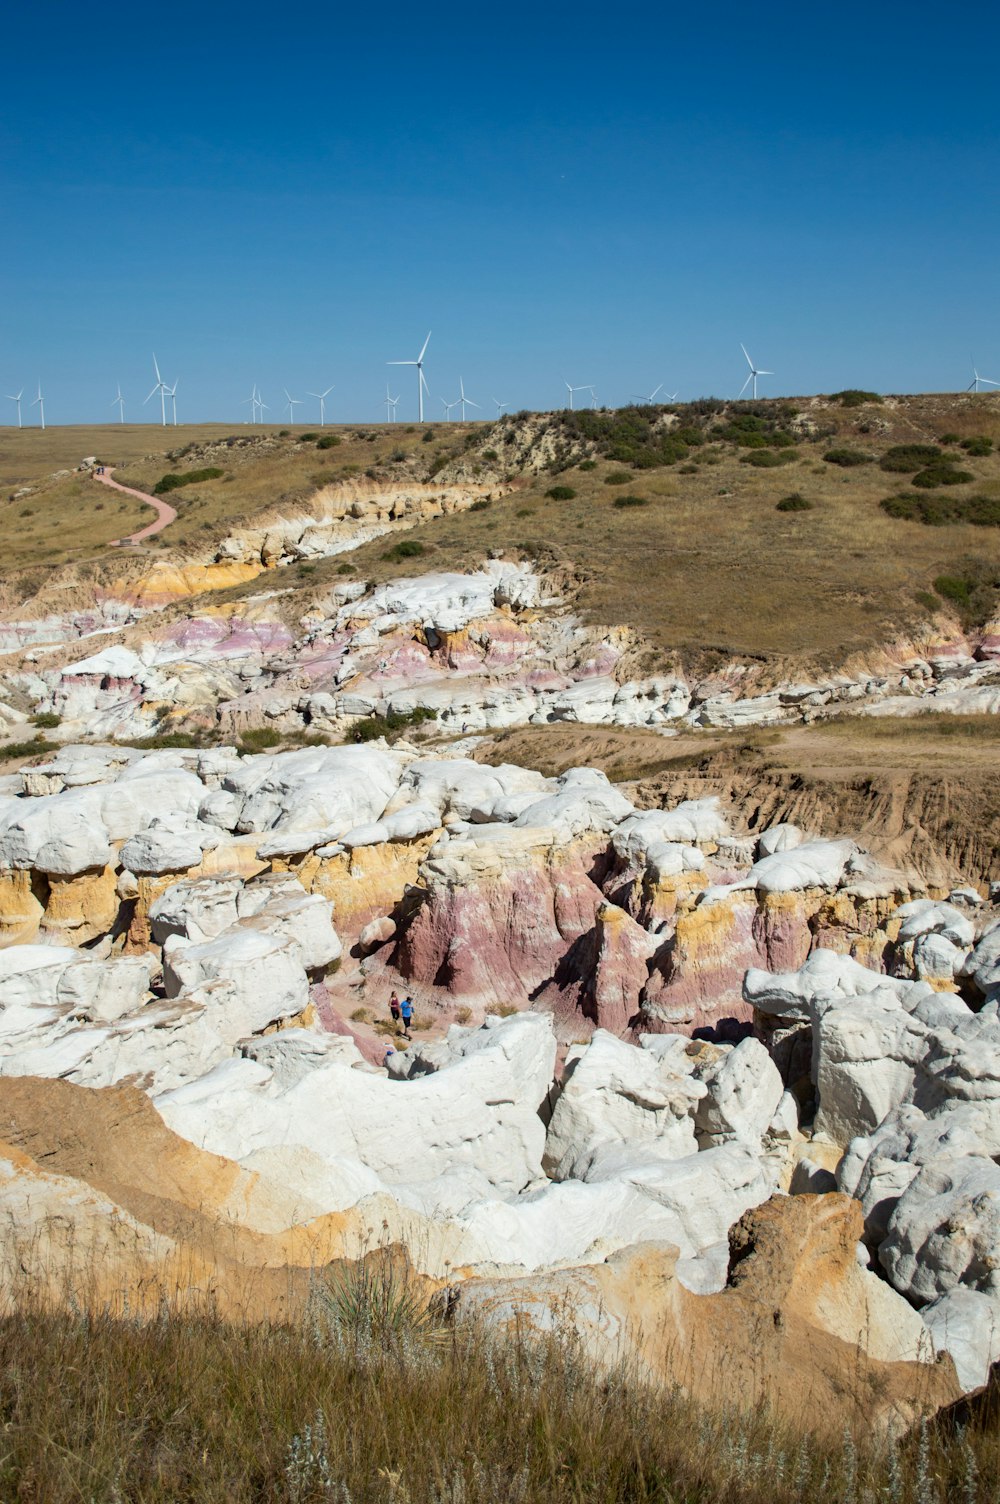 a view of a rocky landscape with wind mills in the background